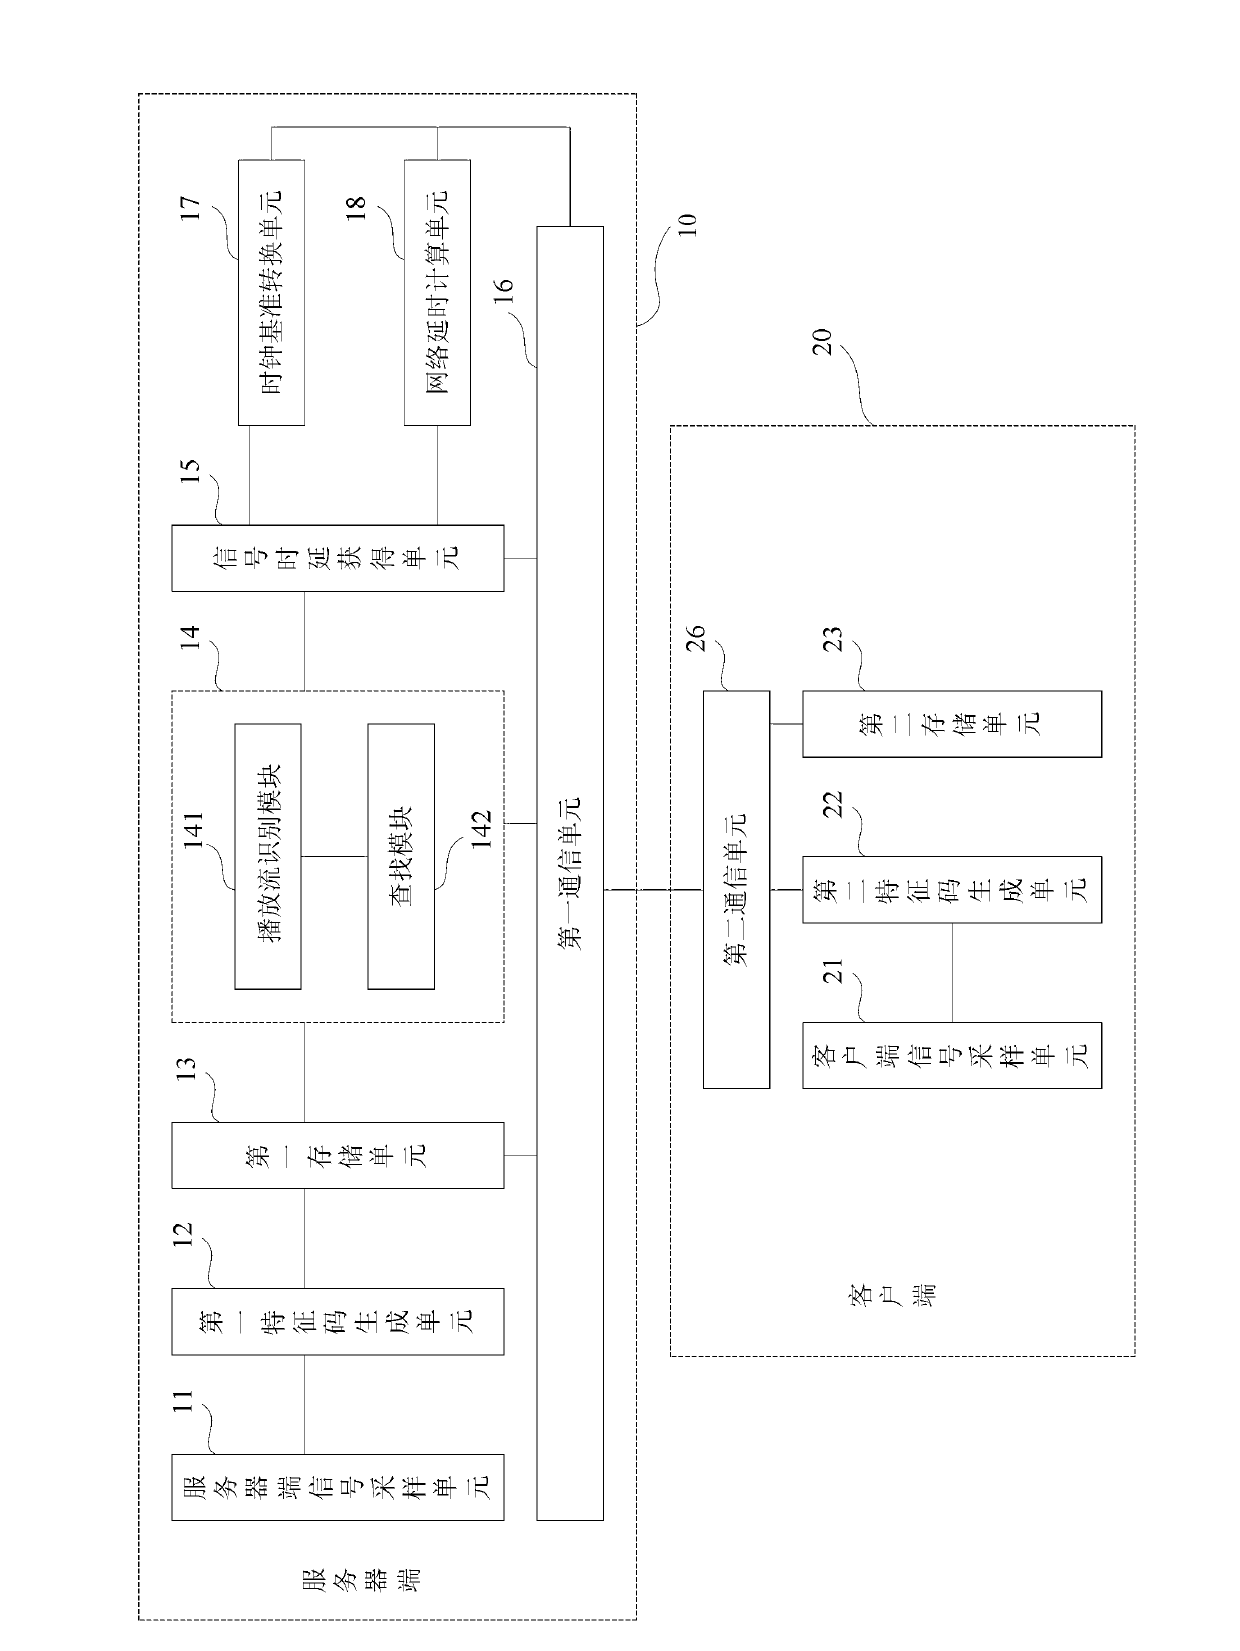 Remote media playing signal time delay test method and test system